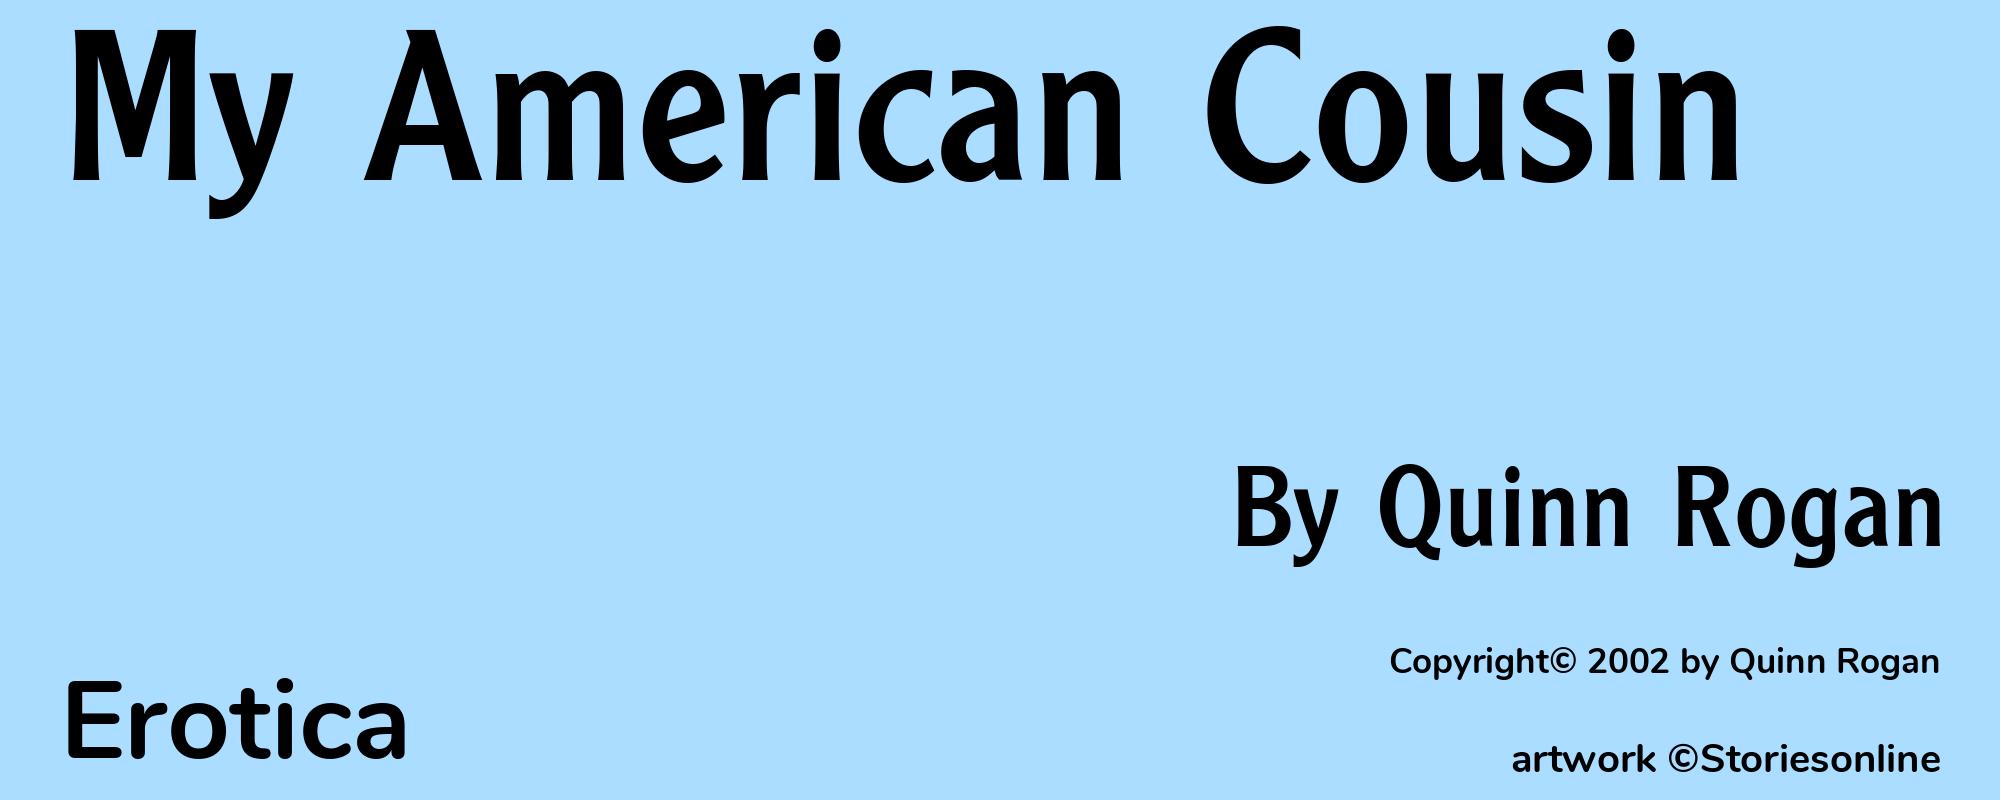 My American Cousin - Cover